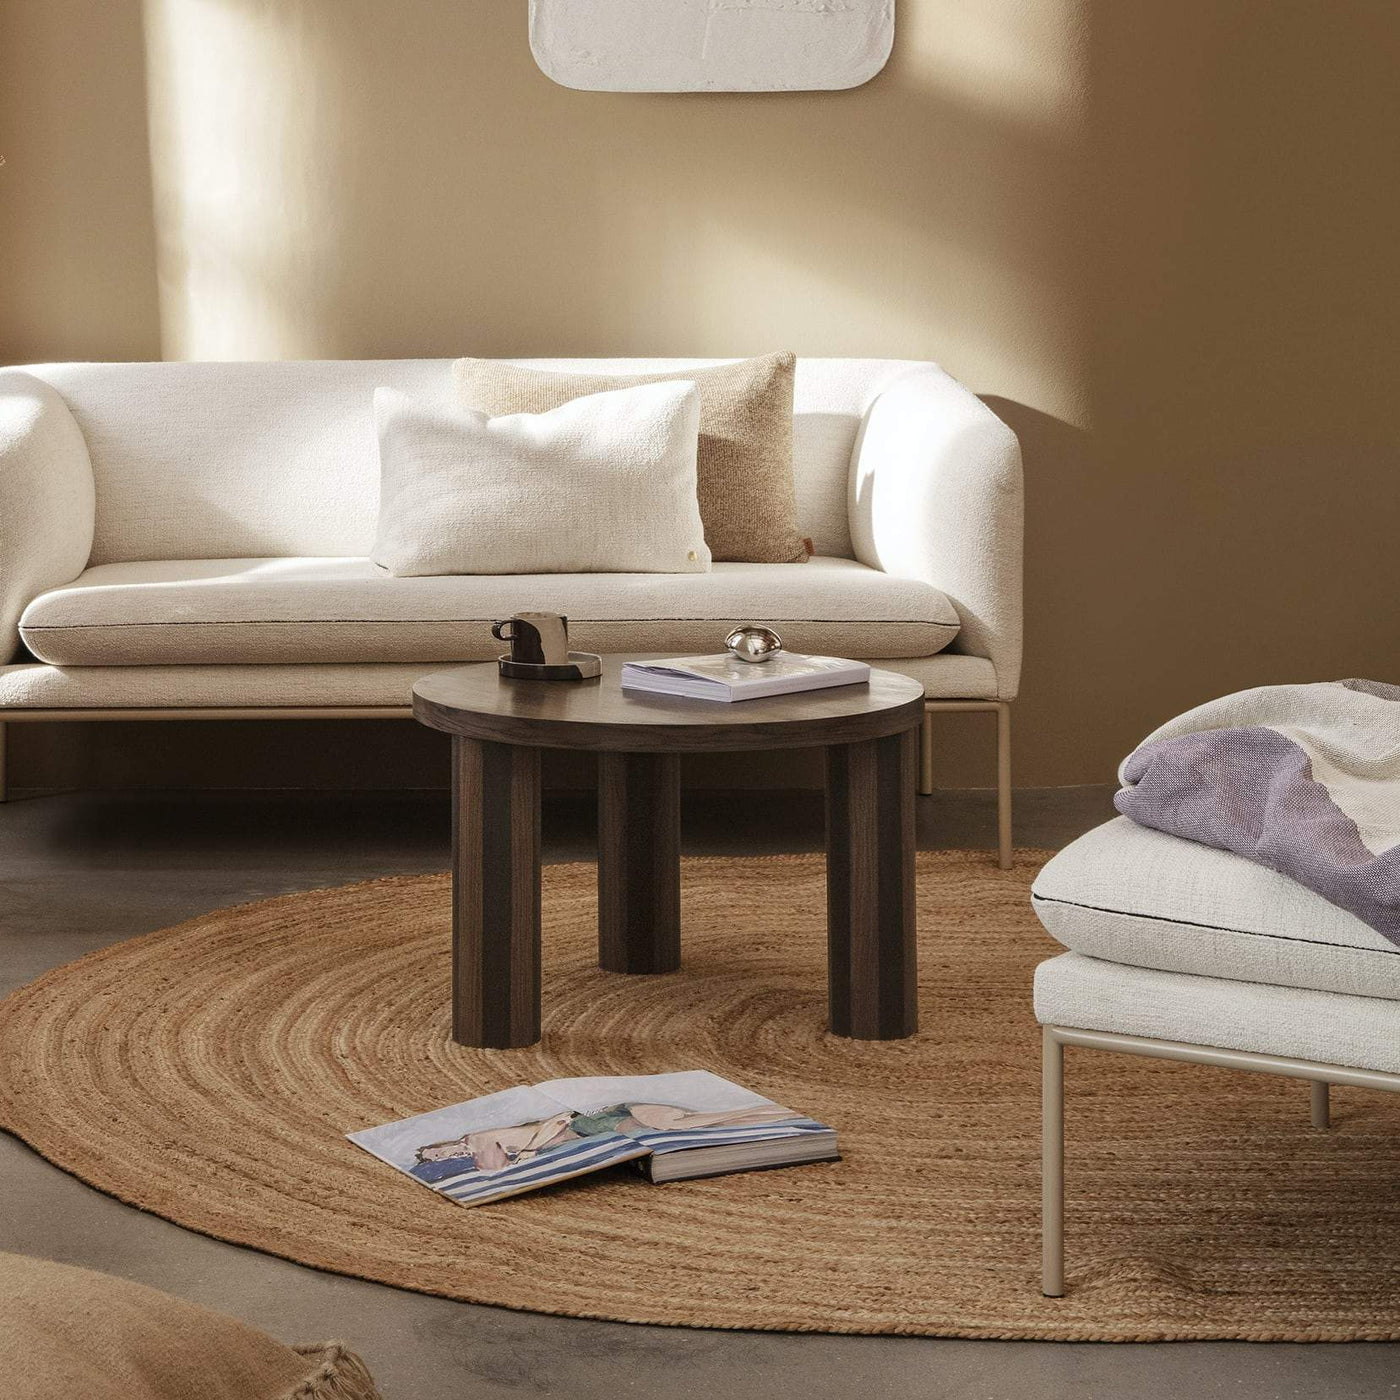 Ferm Living Post Coffee Table Lines. Shop online at someday designs